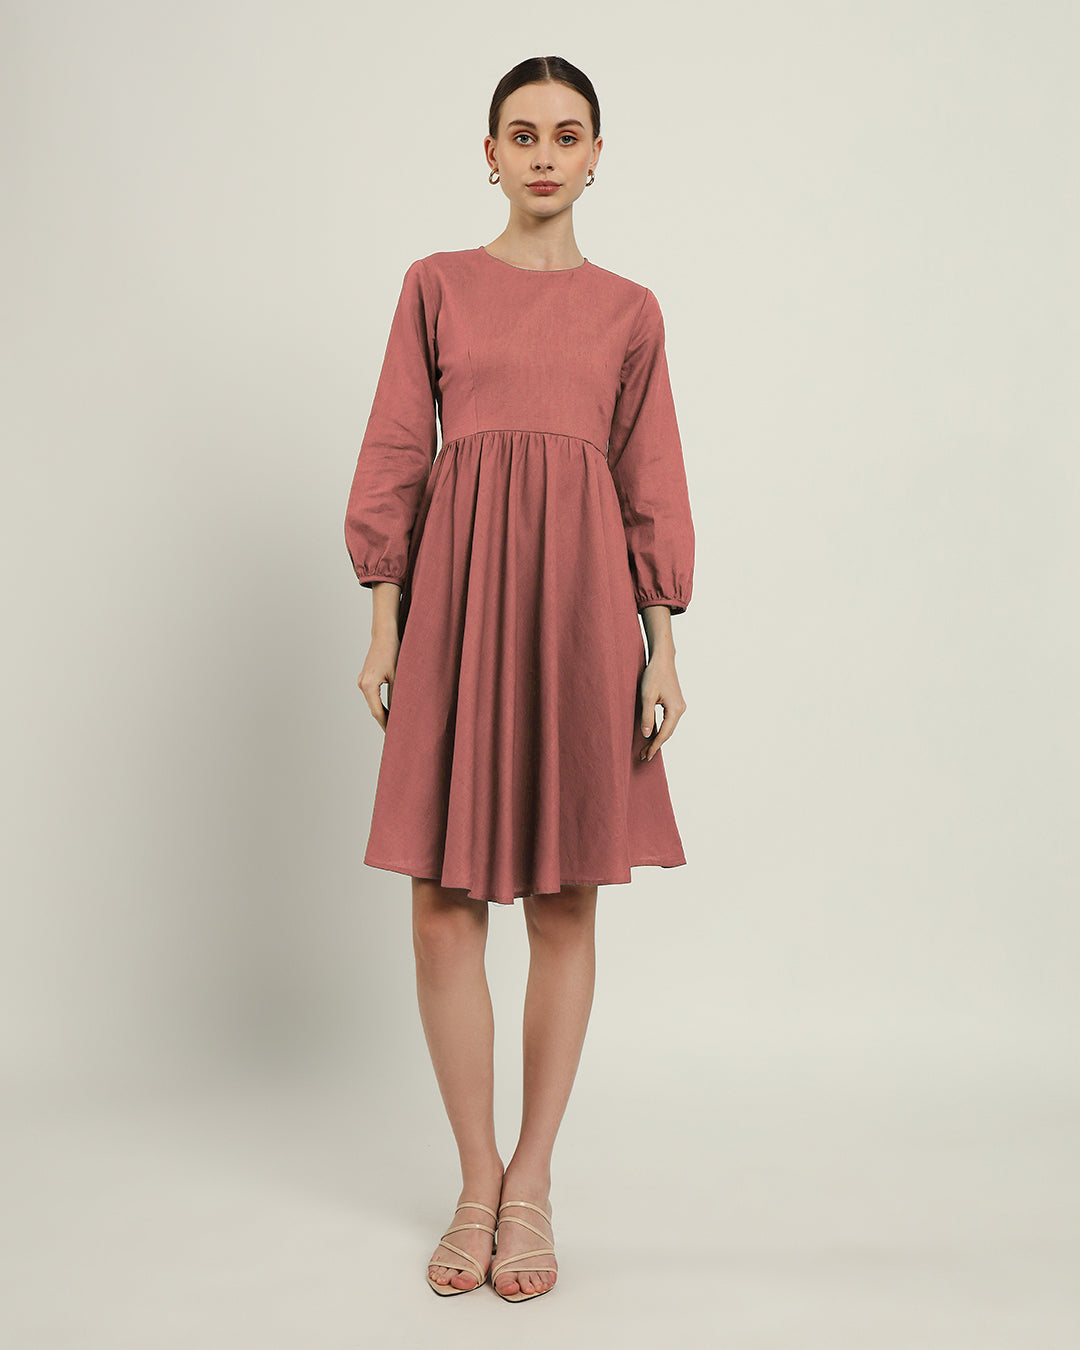 The Exeter Ivory Pink Cotton Dress